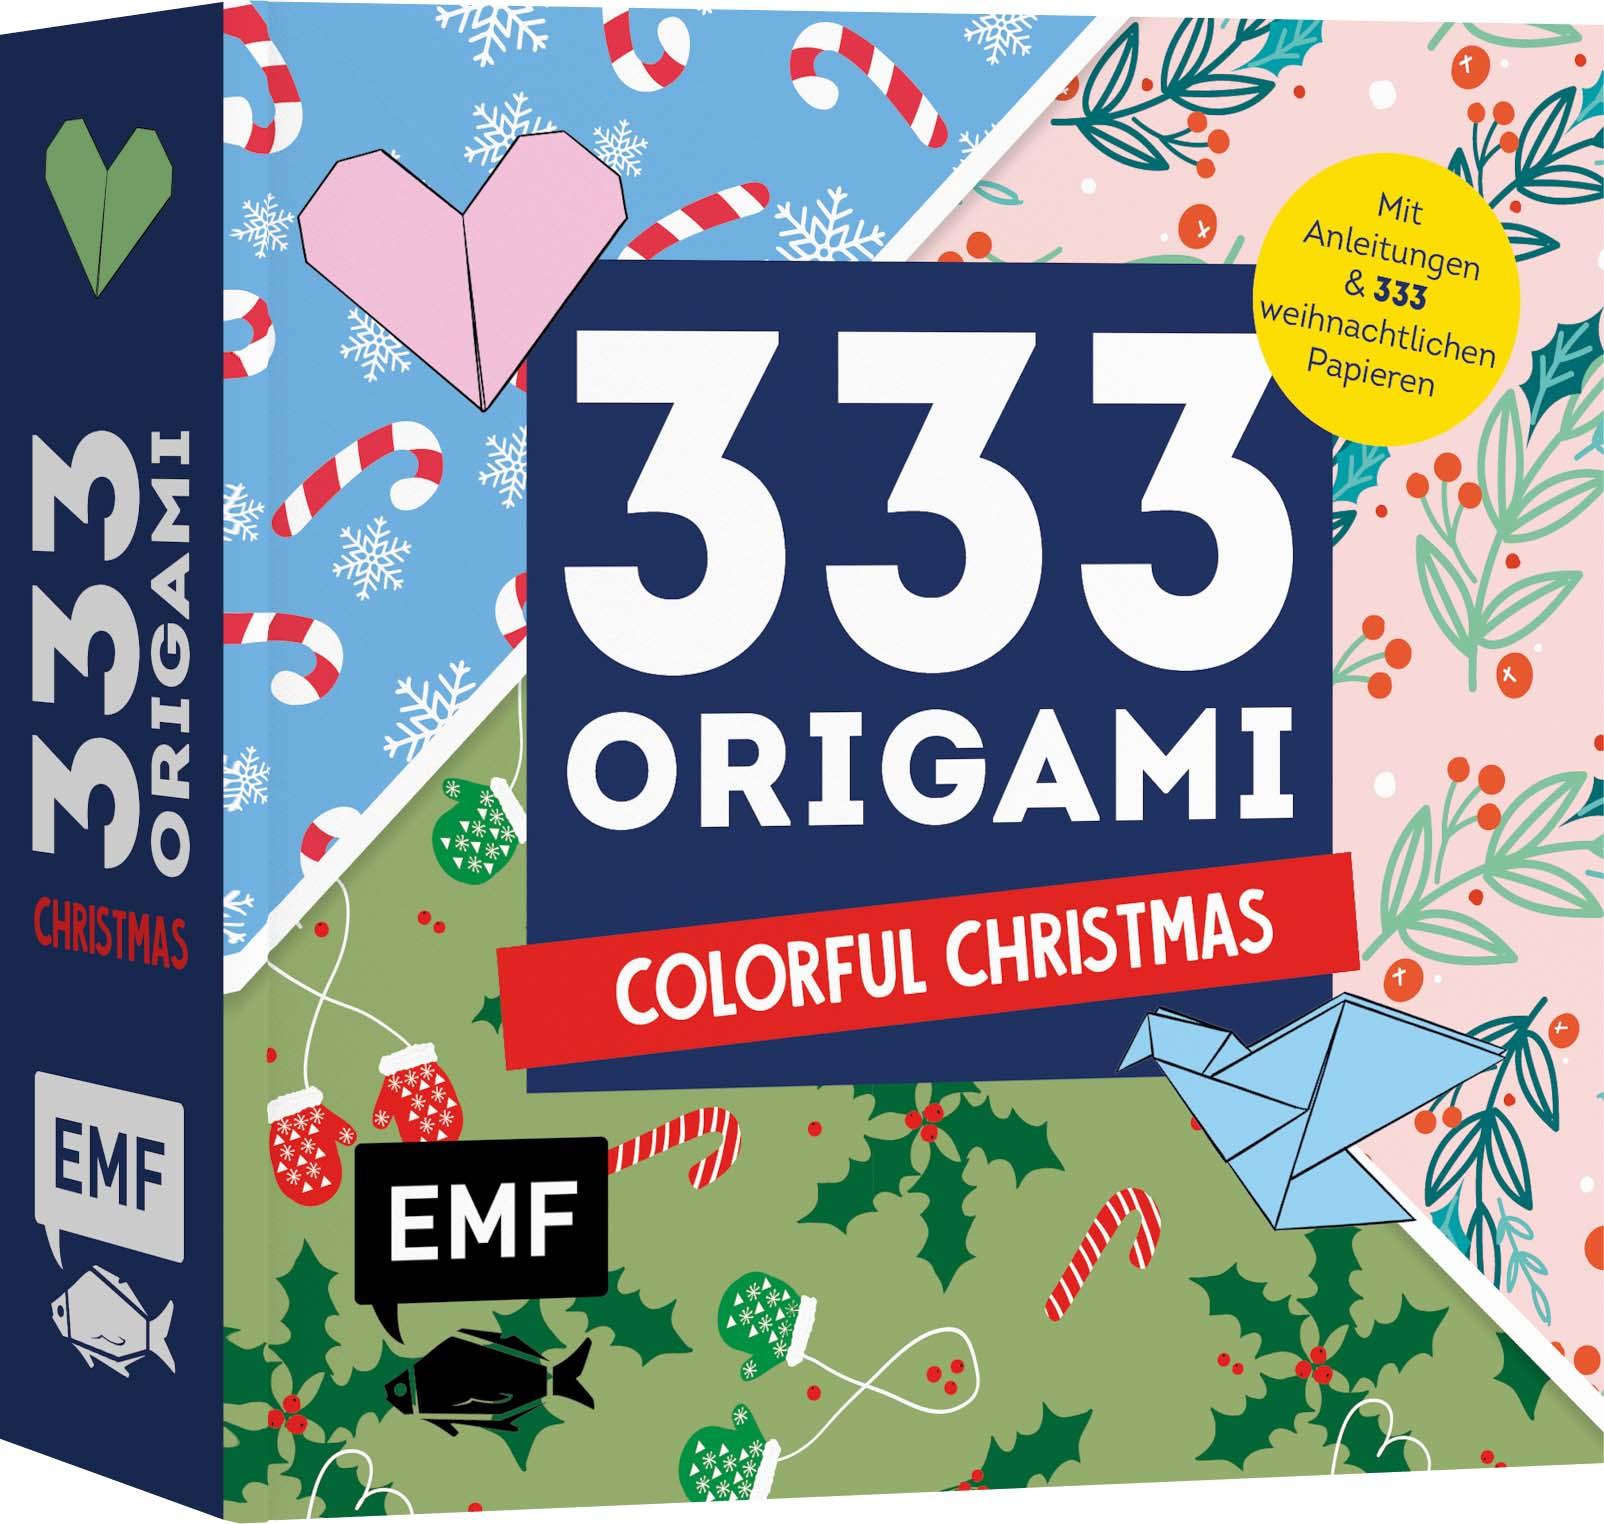 Book 333 Origami - Colorful Christmas 